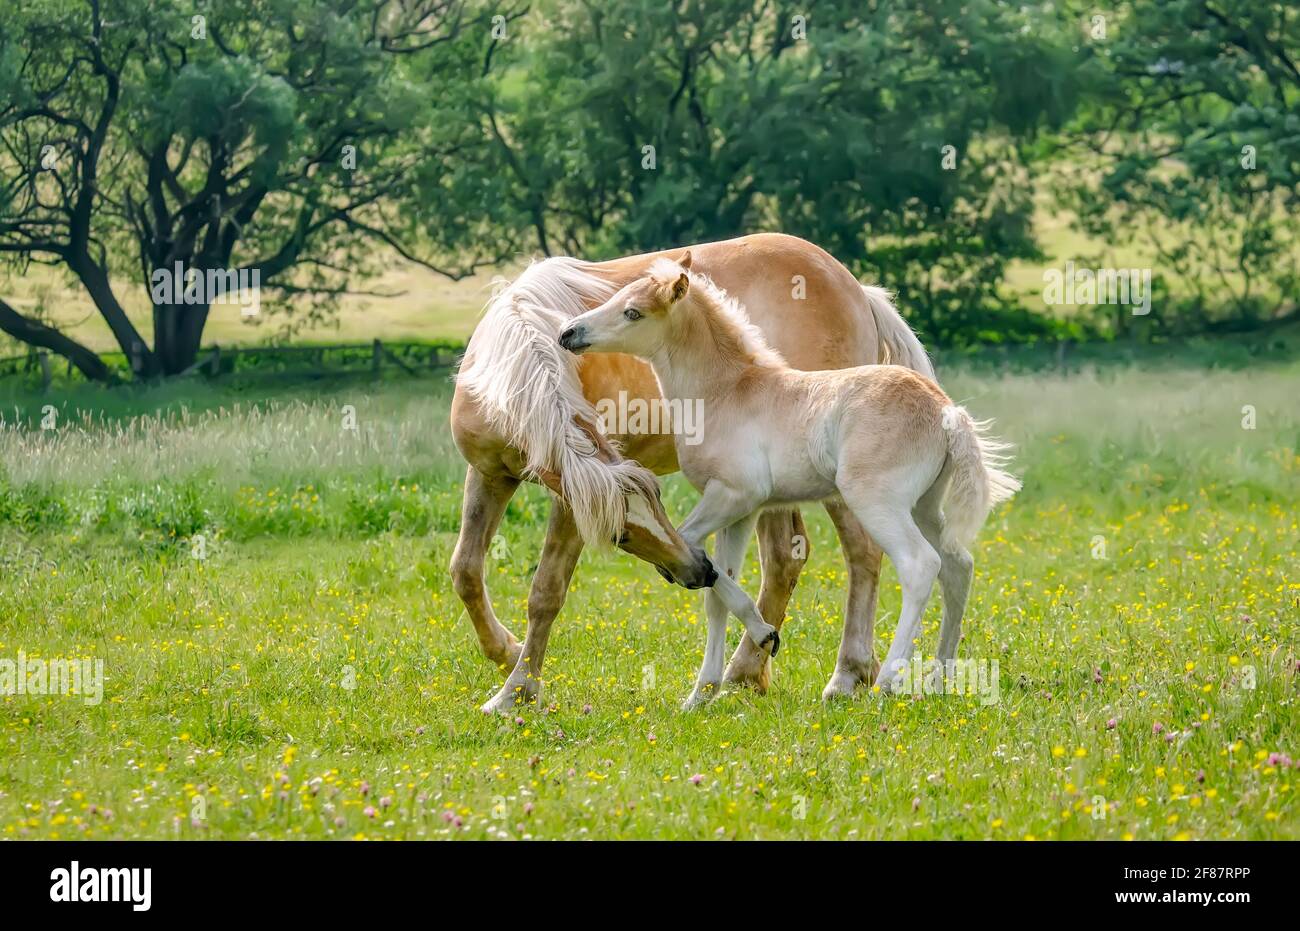 Two Haflinger horses, foal and yearling colt, playing together and nibbling each other, on a green grass meadow in spring Stock Photo